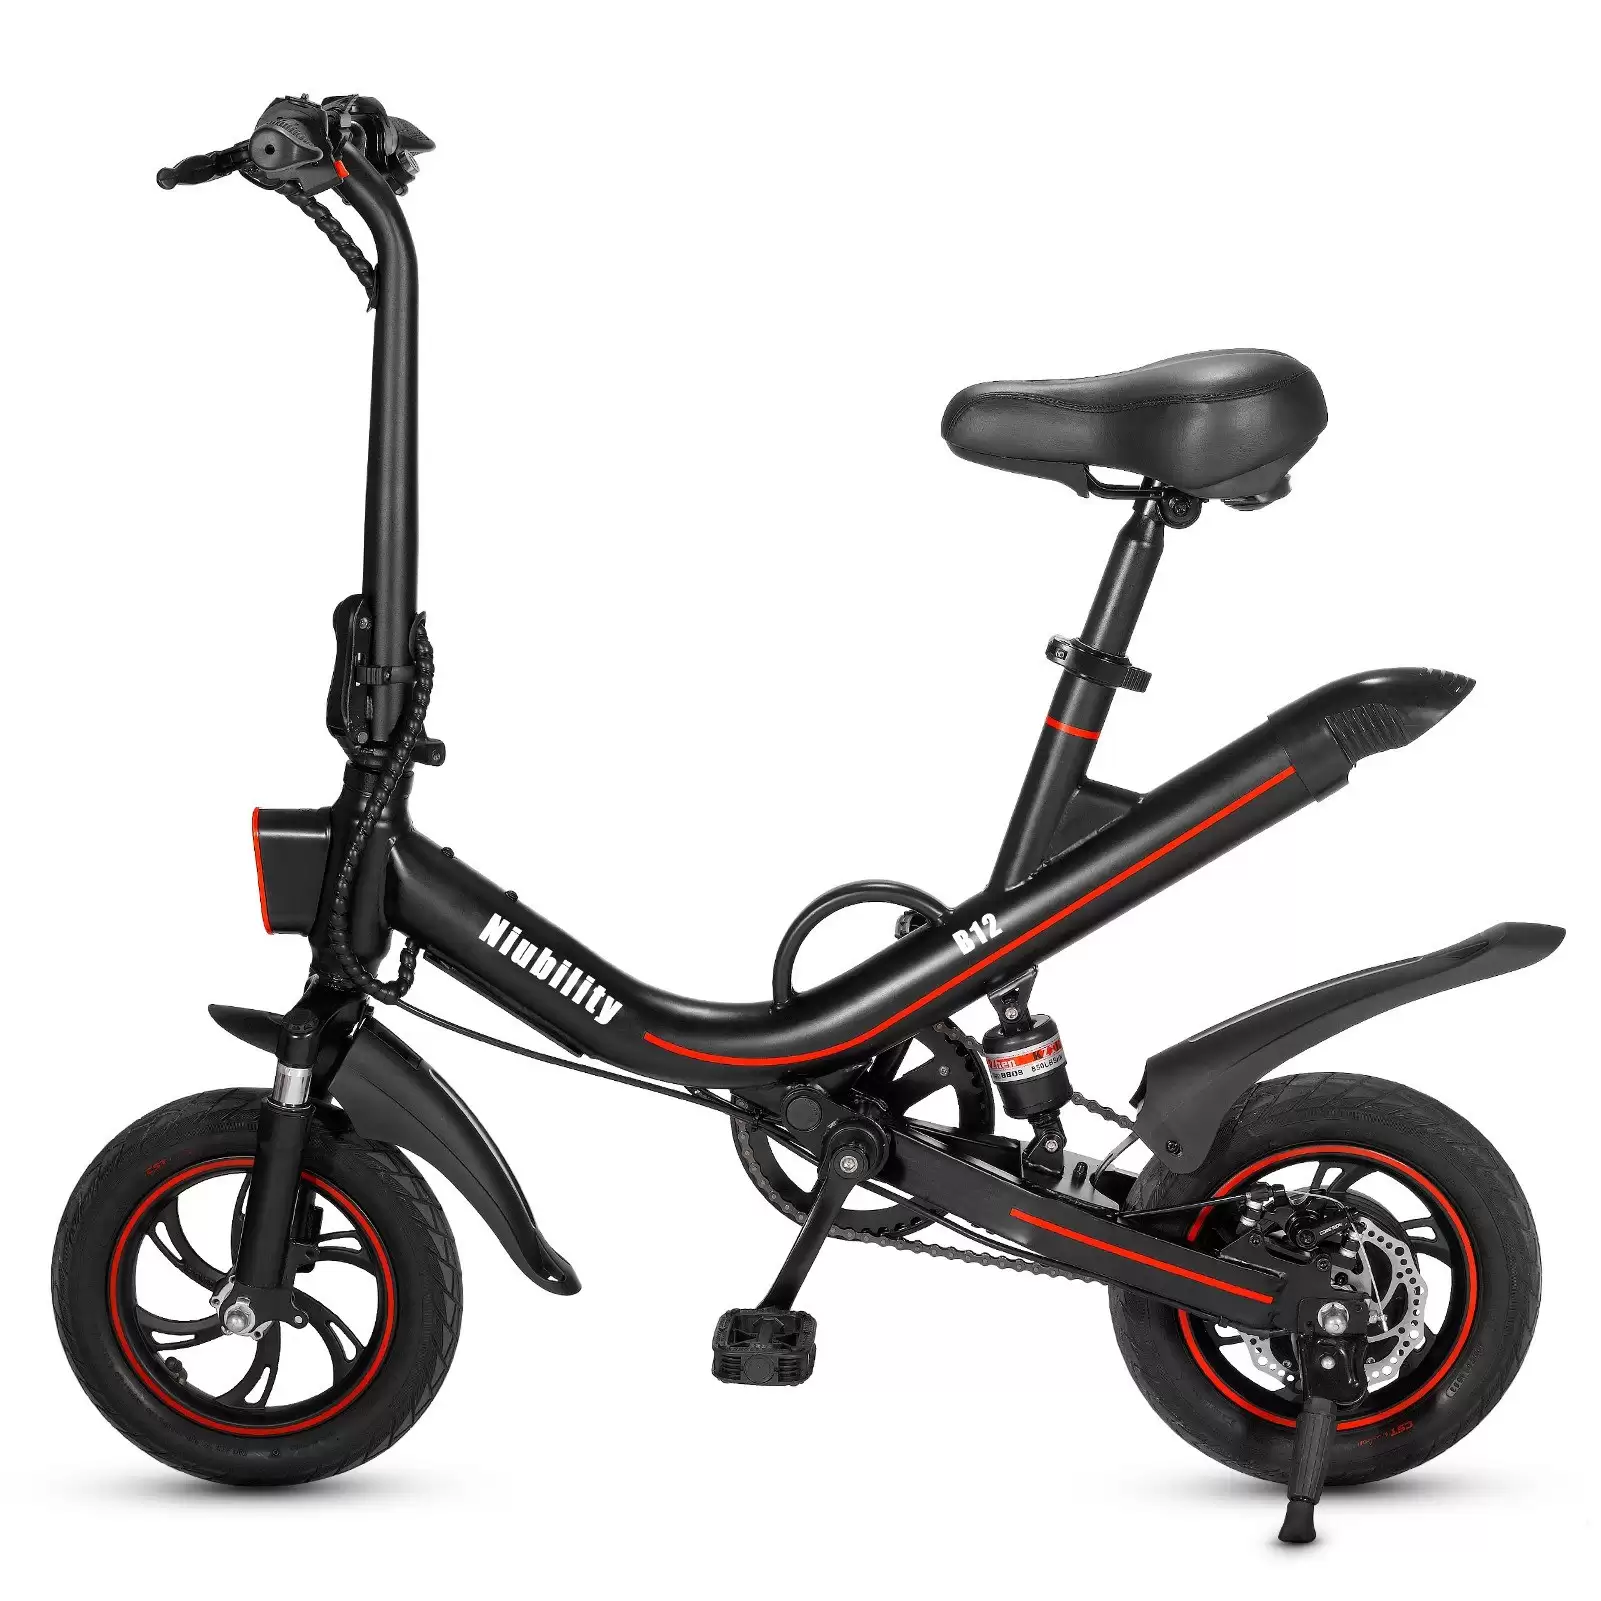 Get Extra 48% Discount On Niubility B12 Folding Electric Bike With This Discount Coupon At Cafago